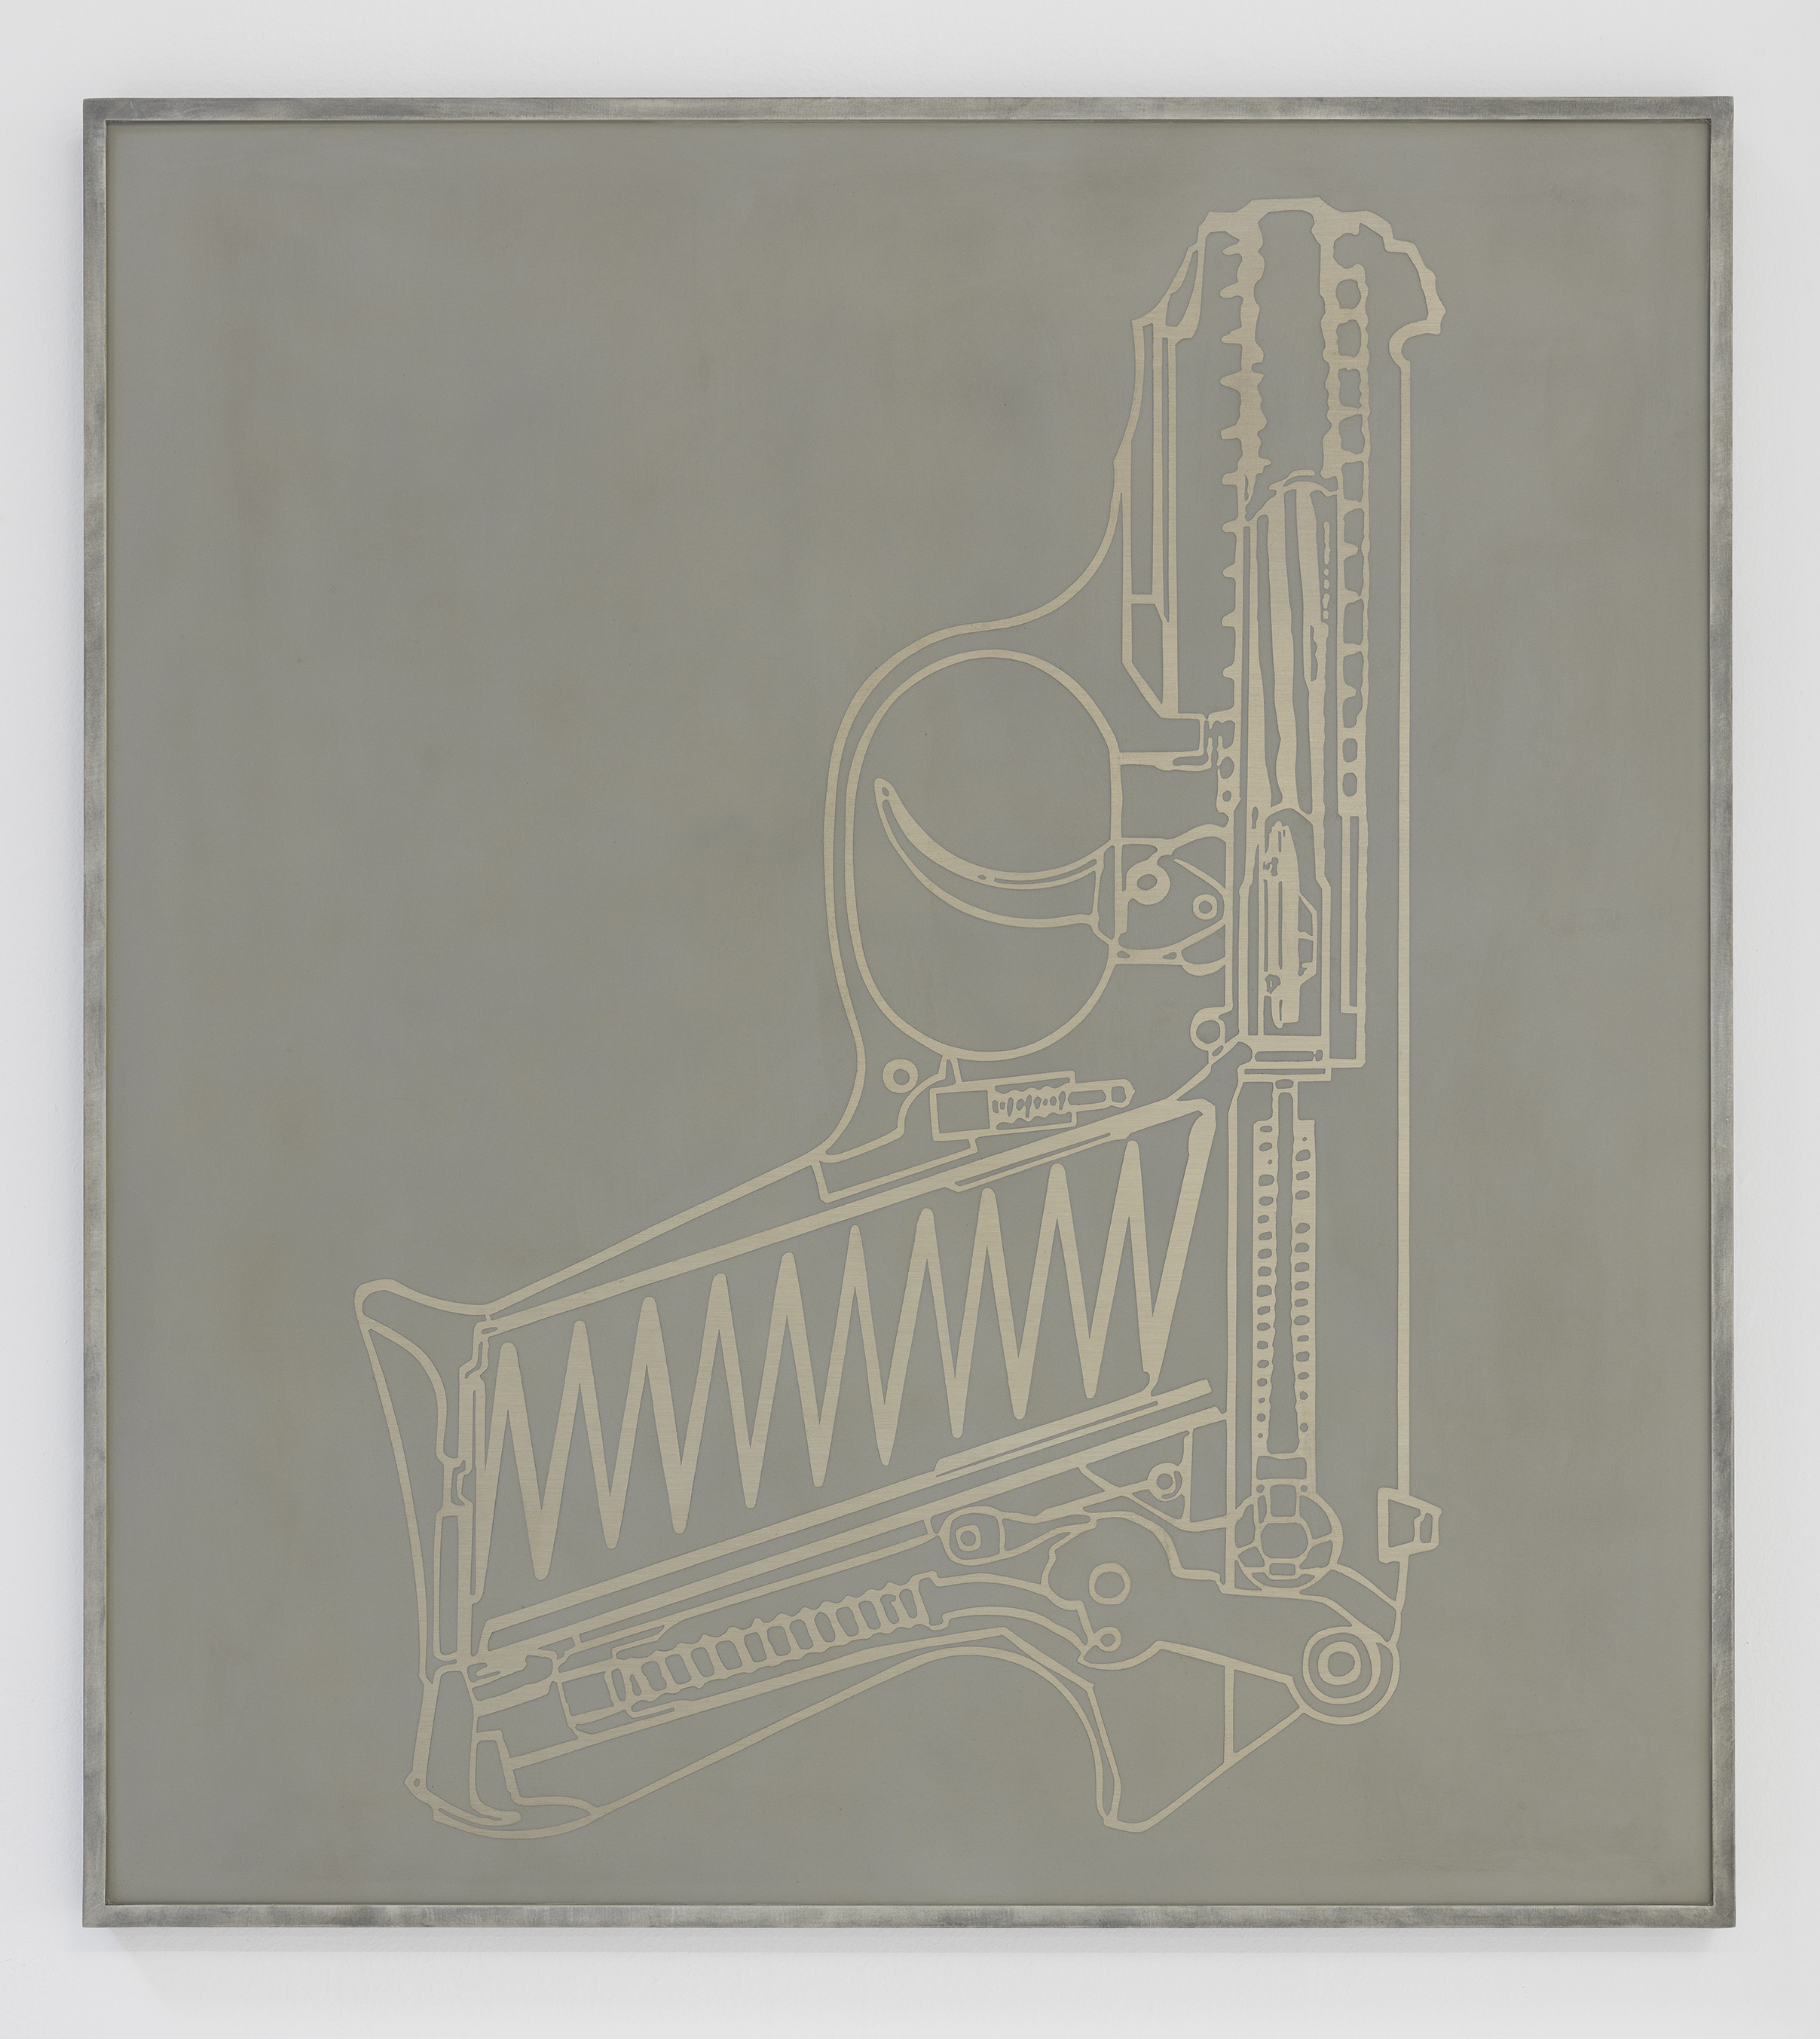 Peter Nagy, Chained To Life, 1987, Sandblasted aluminum, 40h x 36w in.